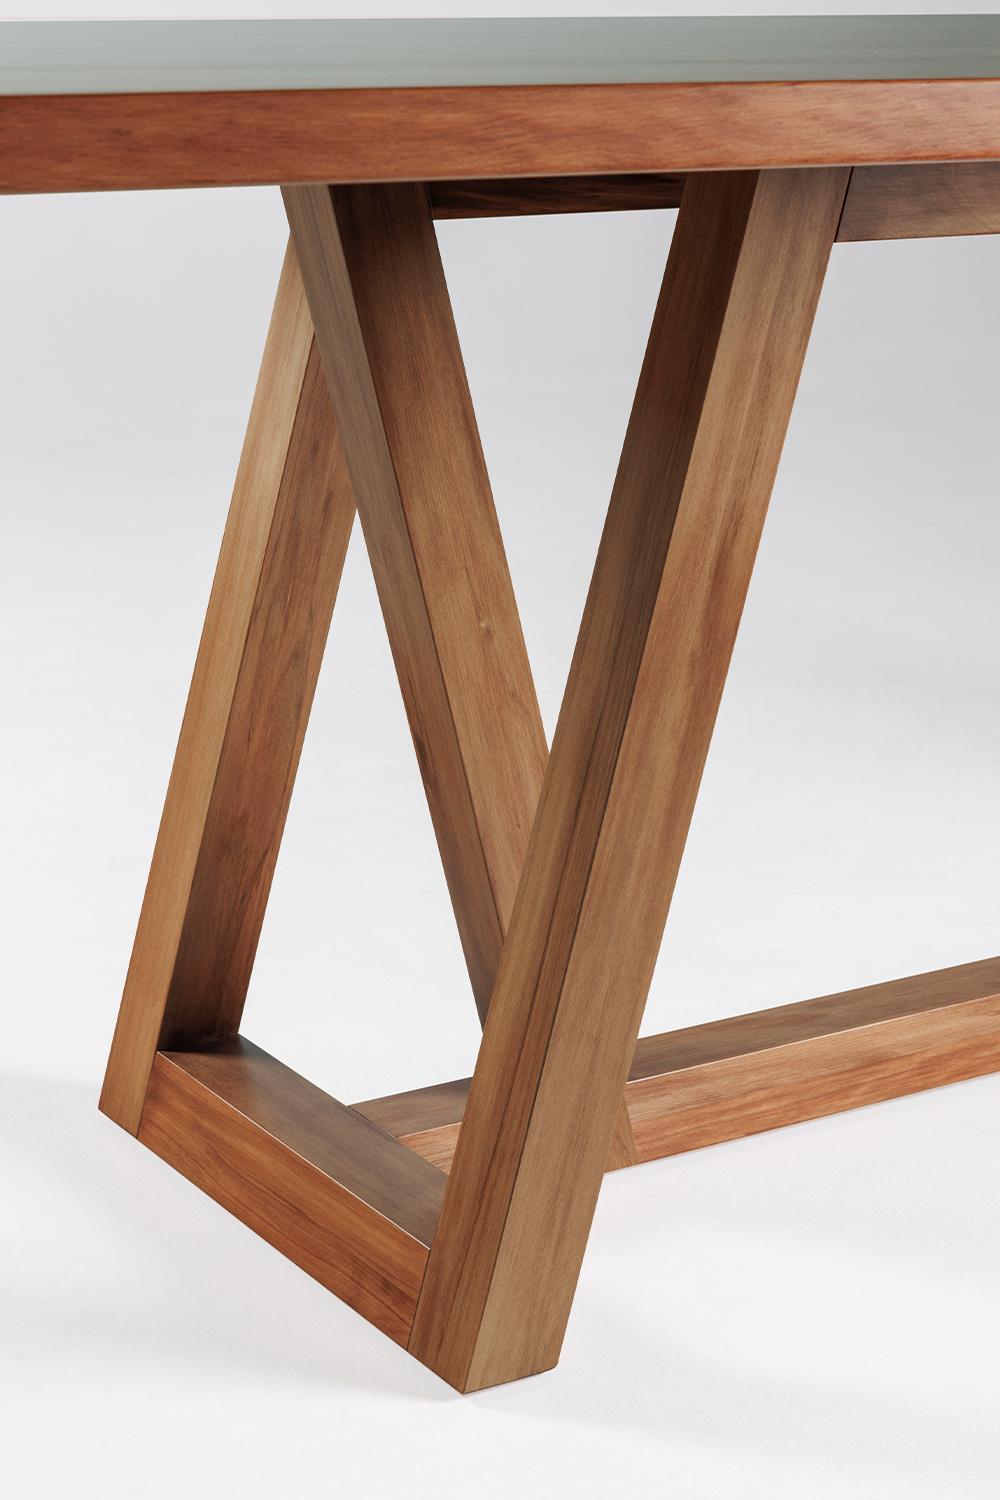 sustainable wood dining table